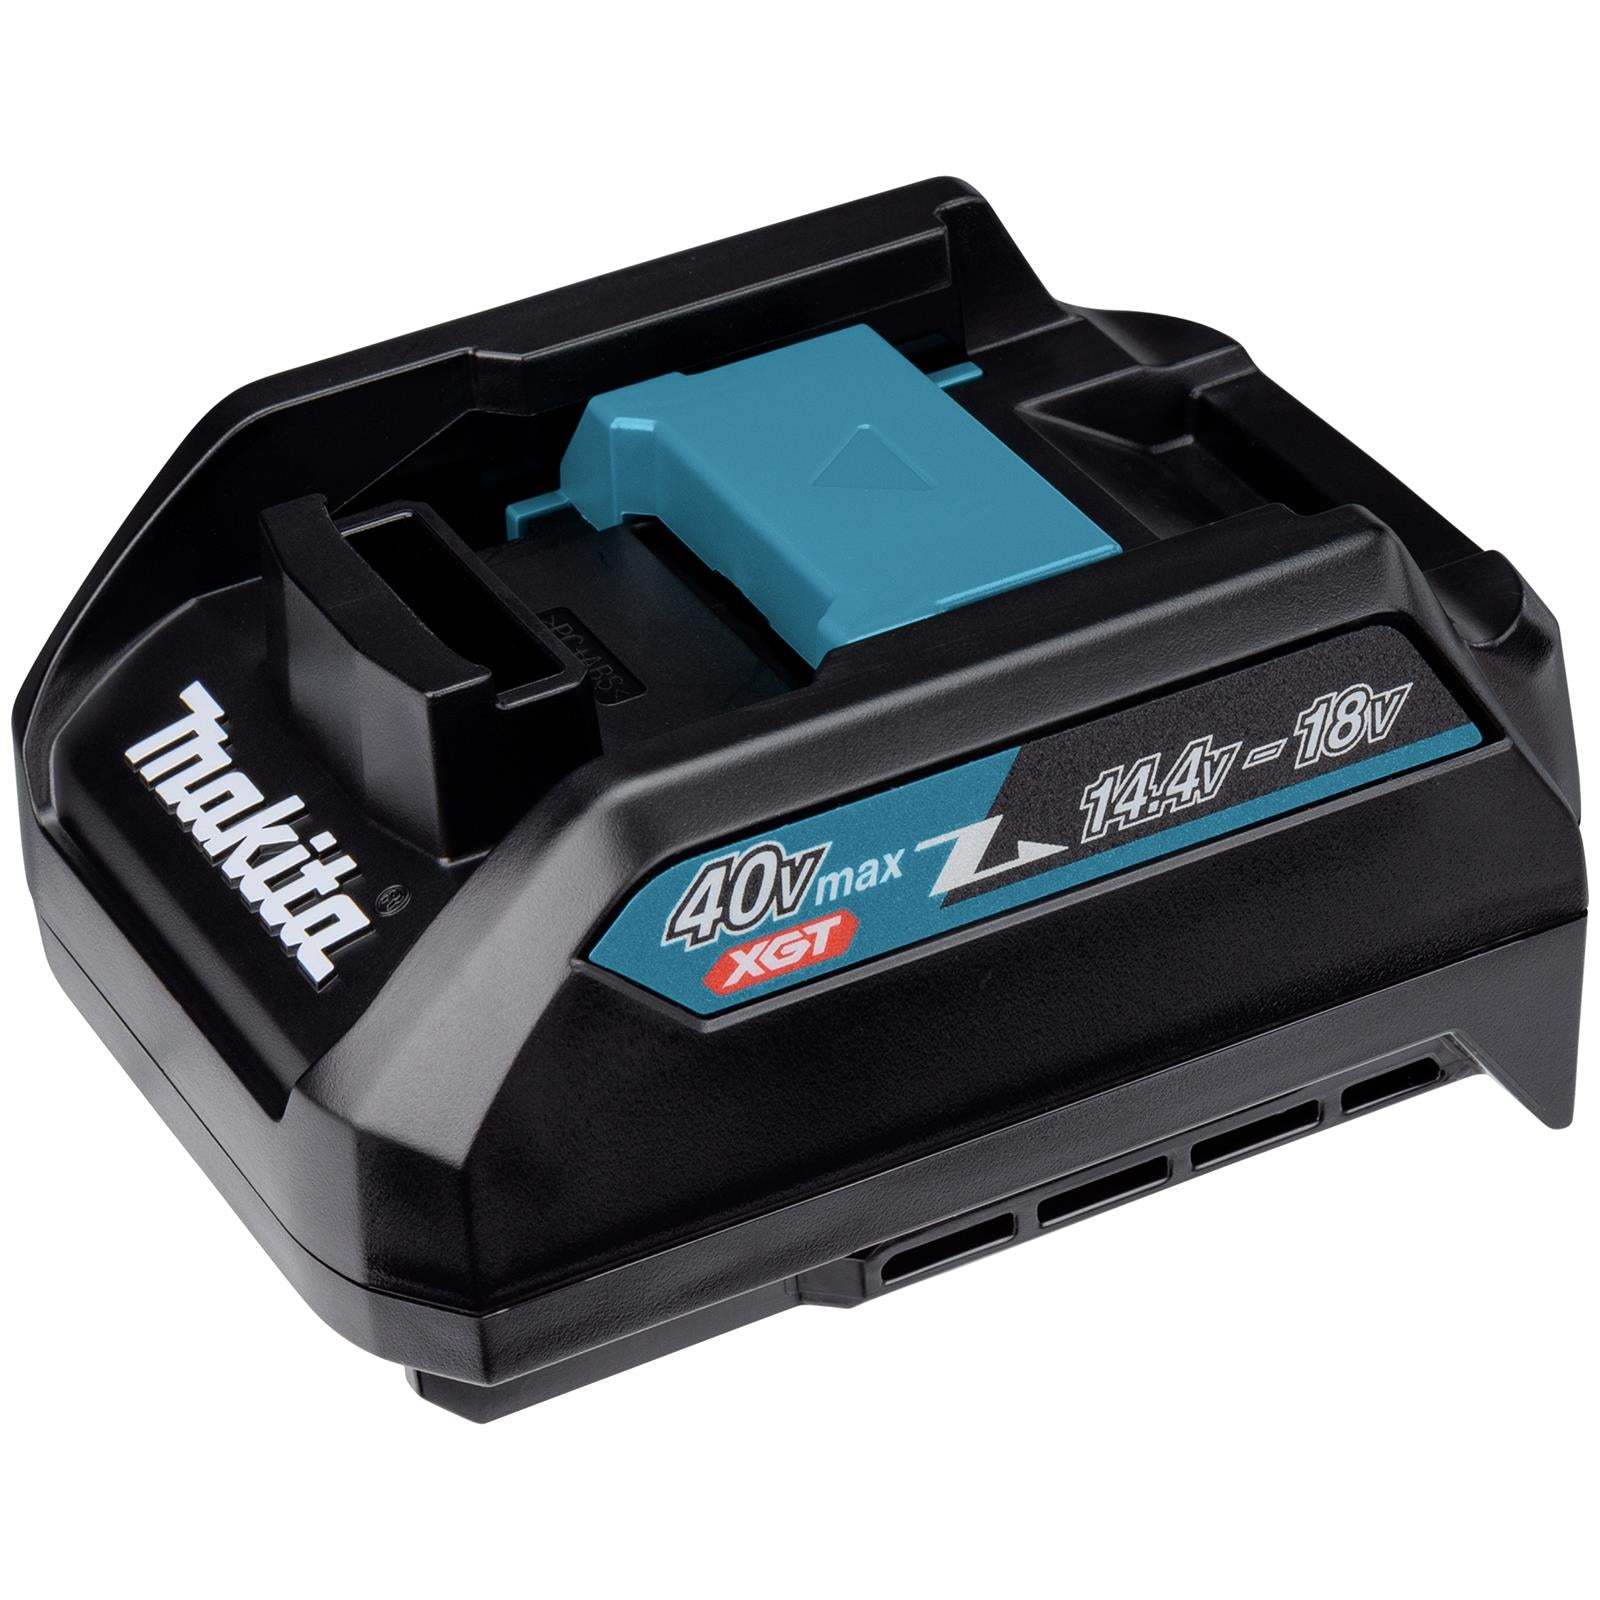 Makita Charger Adapter for XGT Charger to LXT Batteries ADP10